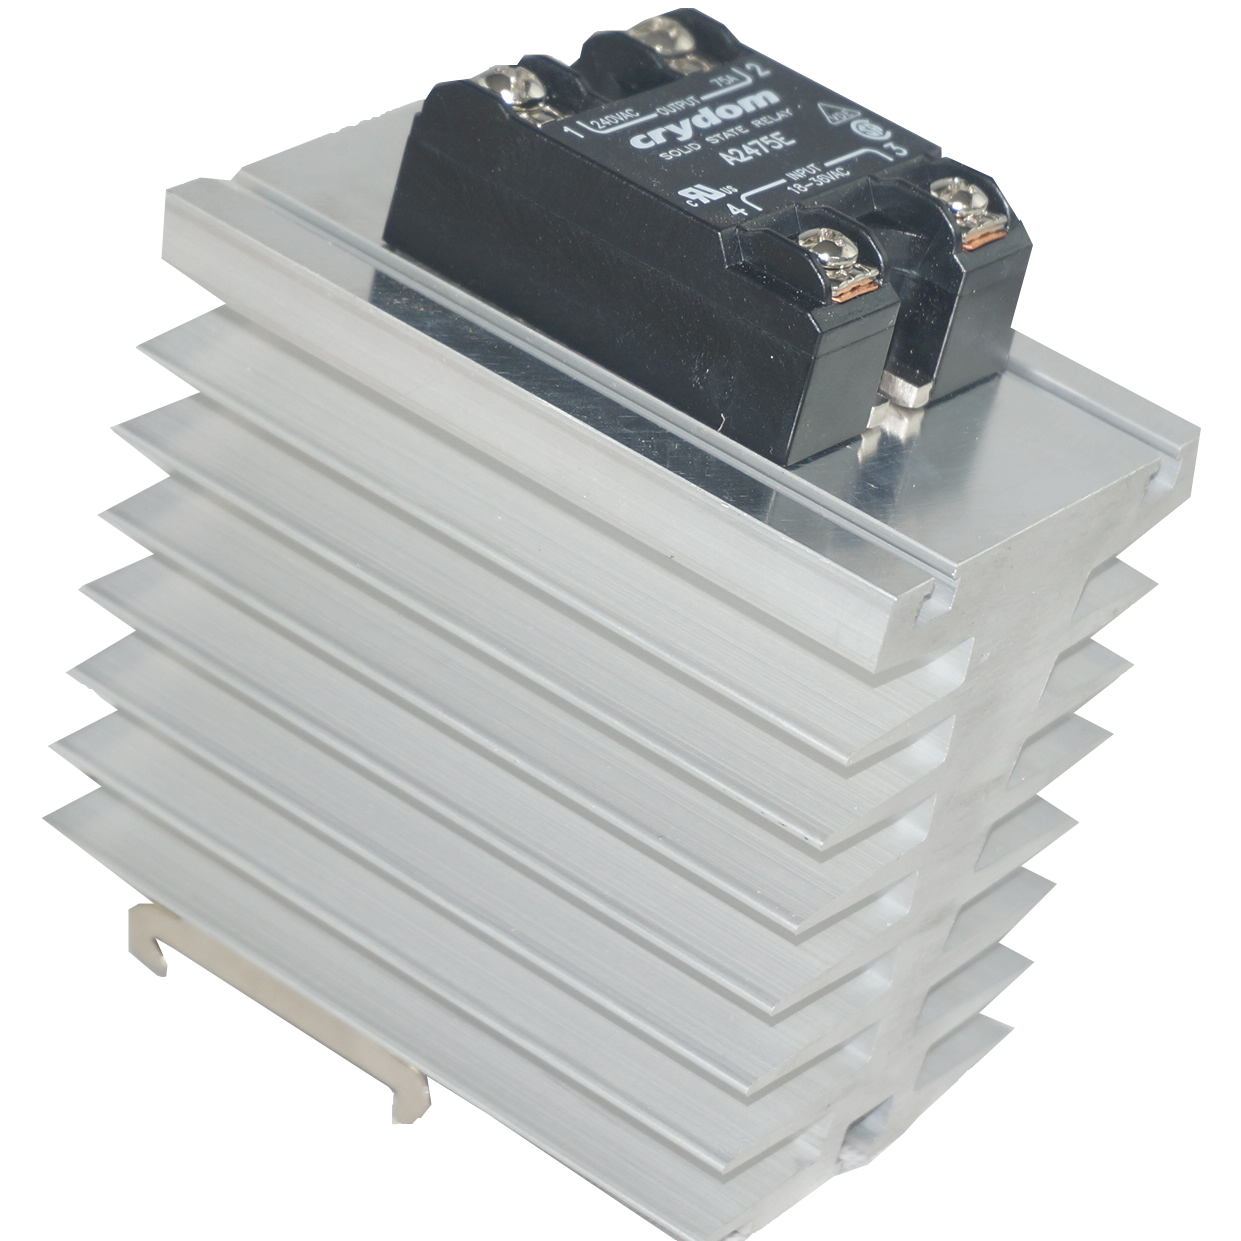 GFIN/70M-DR + HA6050, Din Rail Mount Solid State Relay with Heatsink, 90-280VAC Control Input, 48-660VAC Output, 34 Amps @ 40 Deg C ambient